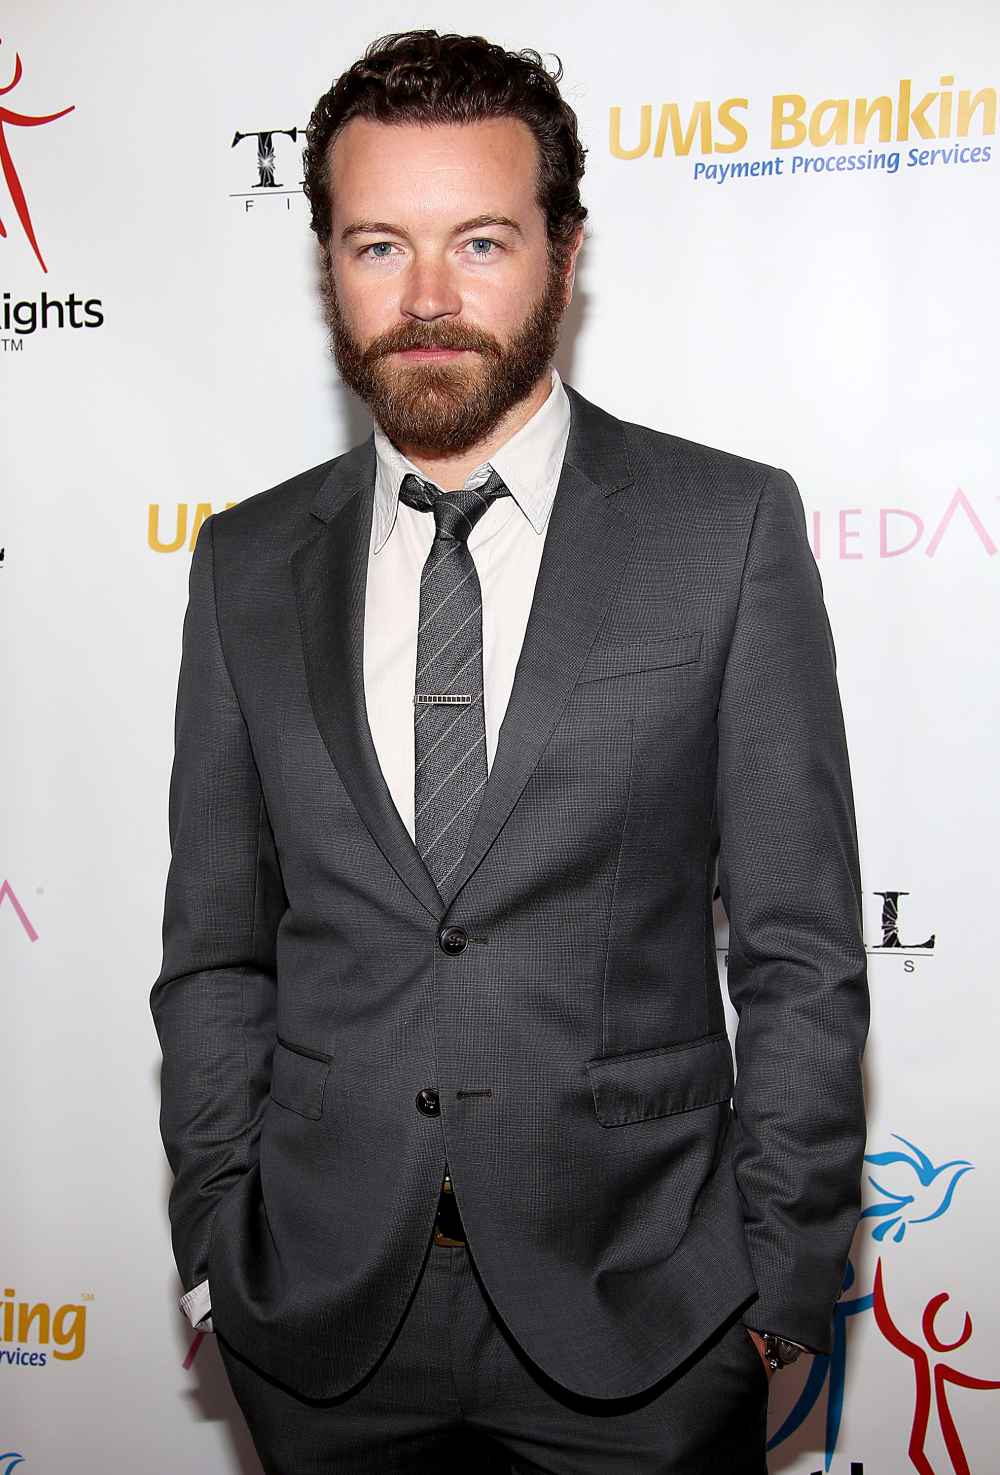 Danny Masterson Will Not Be Accepting Plea Deal Regarding Rape Charges